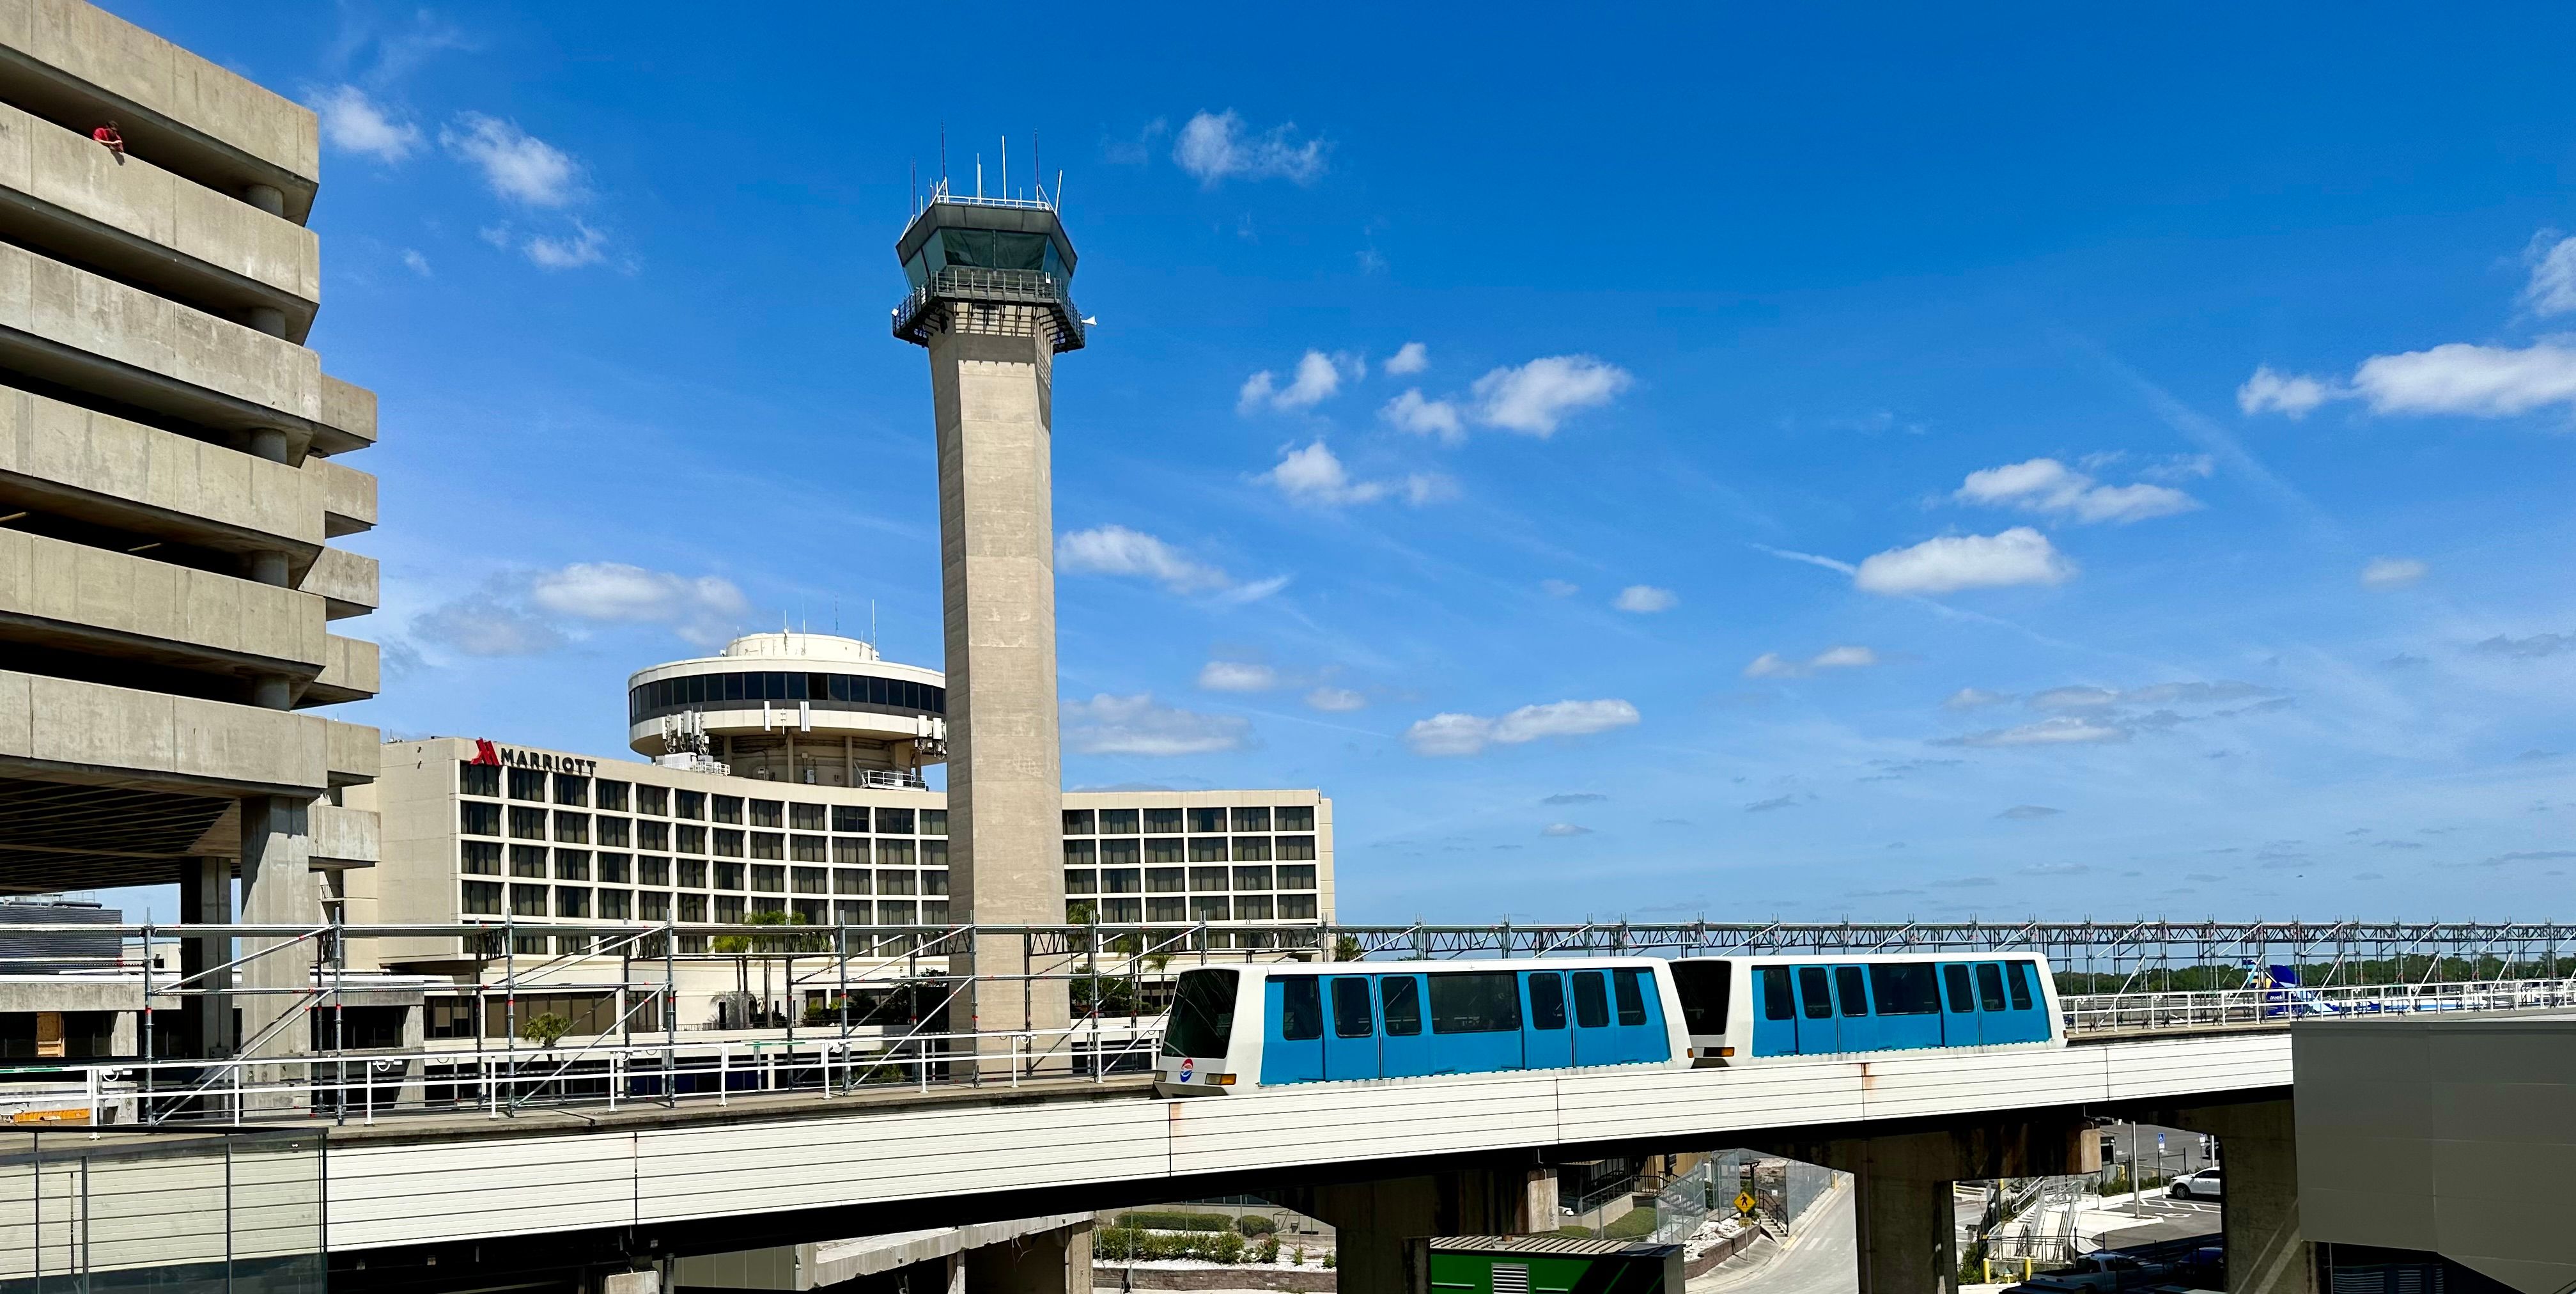 The Tampa International Airport Blue Shuttle moving on the rail.